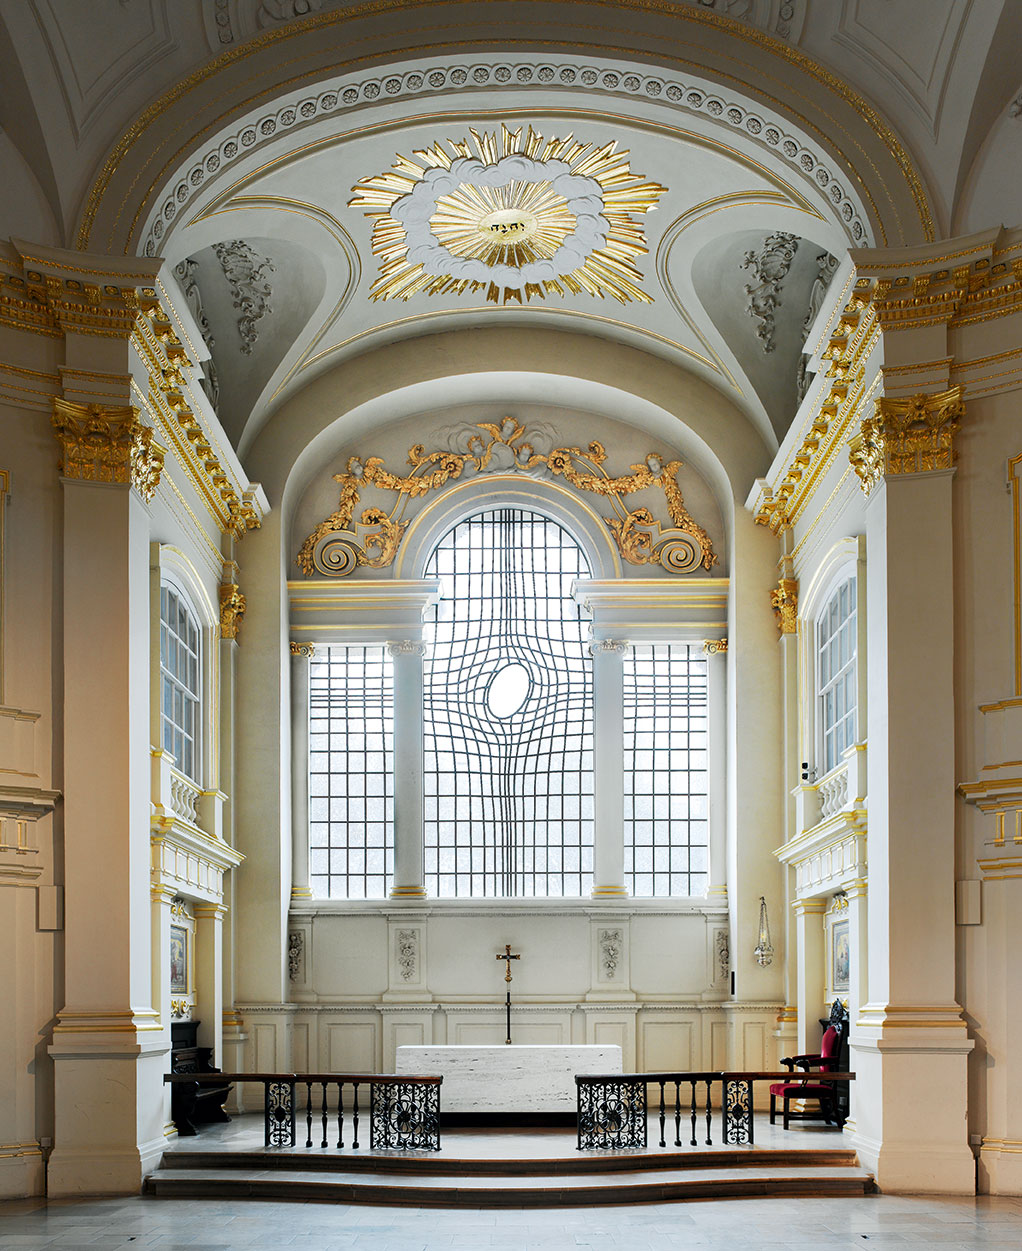 Shirazeh Houshiary and Pip Horne, East Window and Altar, 2011, St. Martin-in-the-Fields, Trafalgar Square, London WC2N 4JJ, England. Photograph by Marc Gascoigne